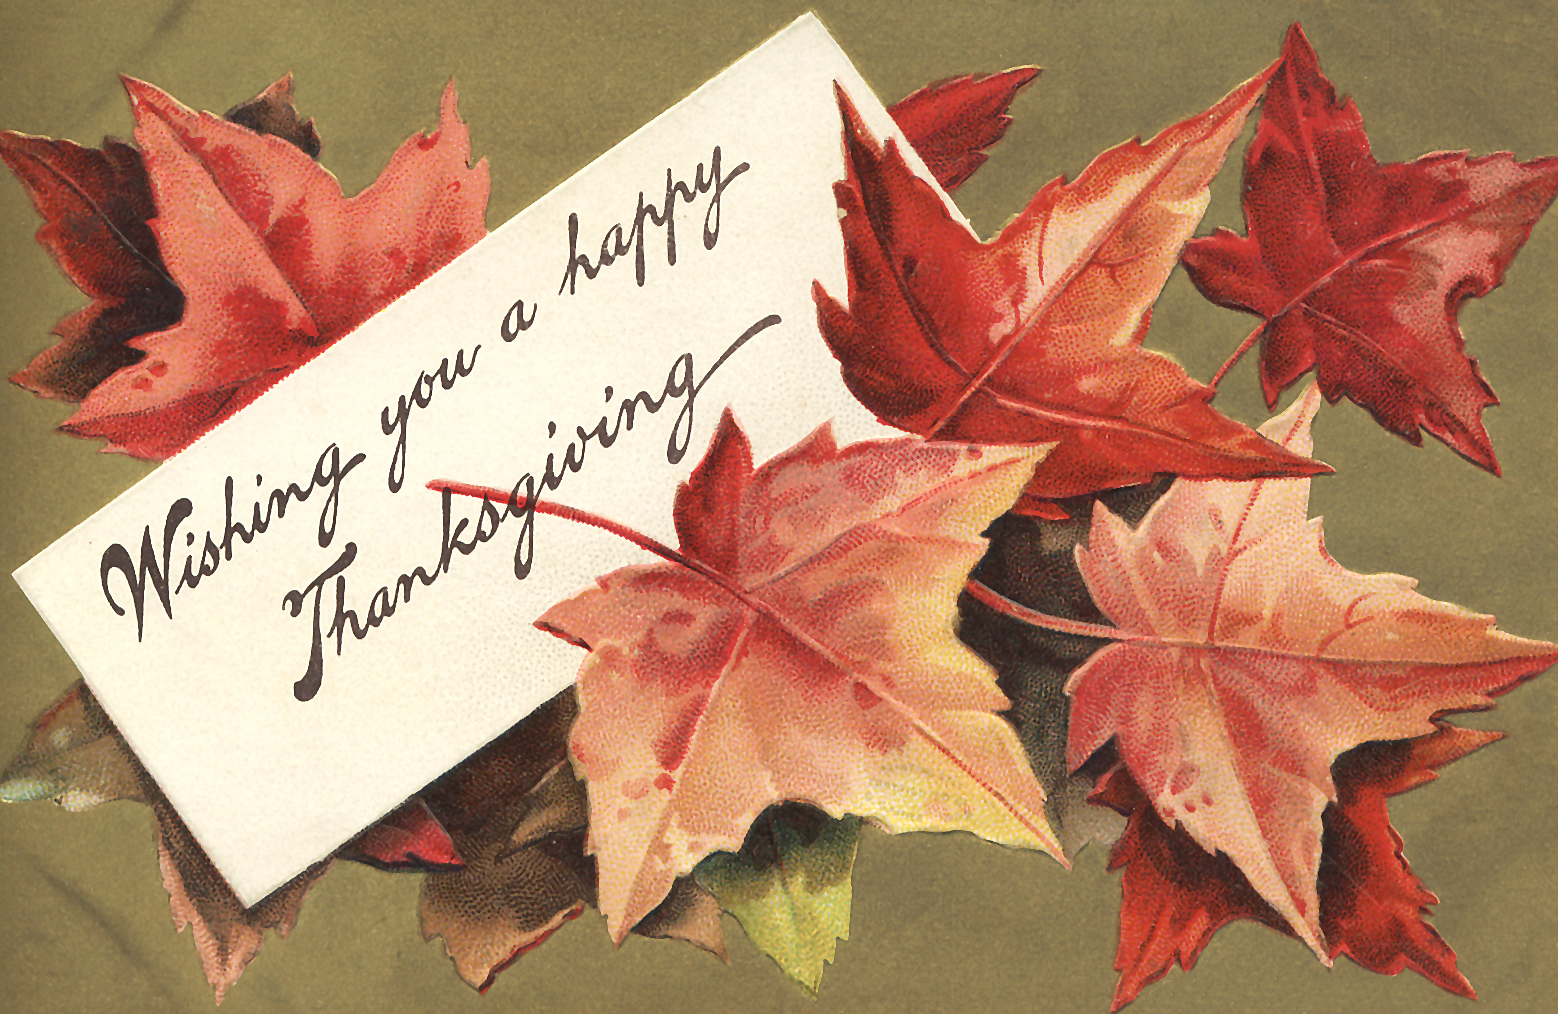 Free Image: Wishing You a Happy Thanksgiving